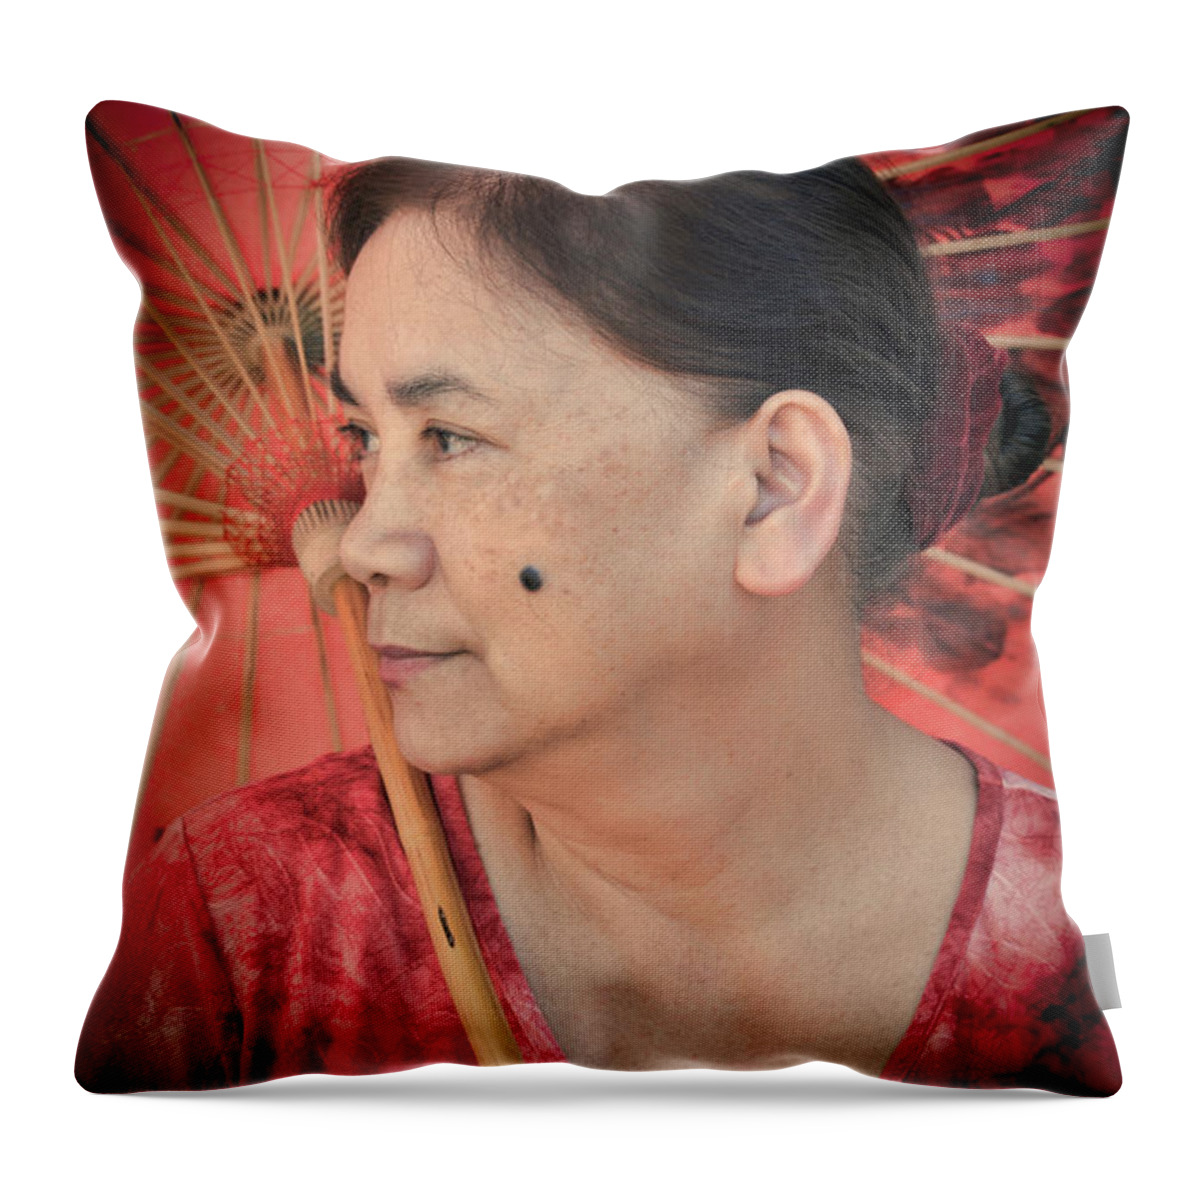 Three Quarter Portrait Throw Pillow featuring the photograph Profile Portrait of a Freckle Faced Filipina with a Mole on Her Cheek by Jim Fitzpatrick